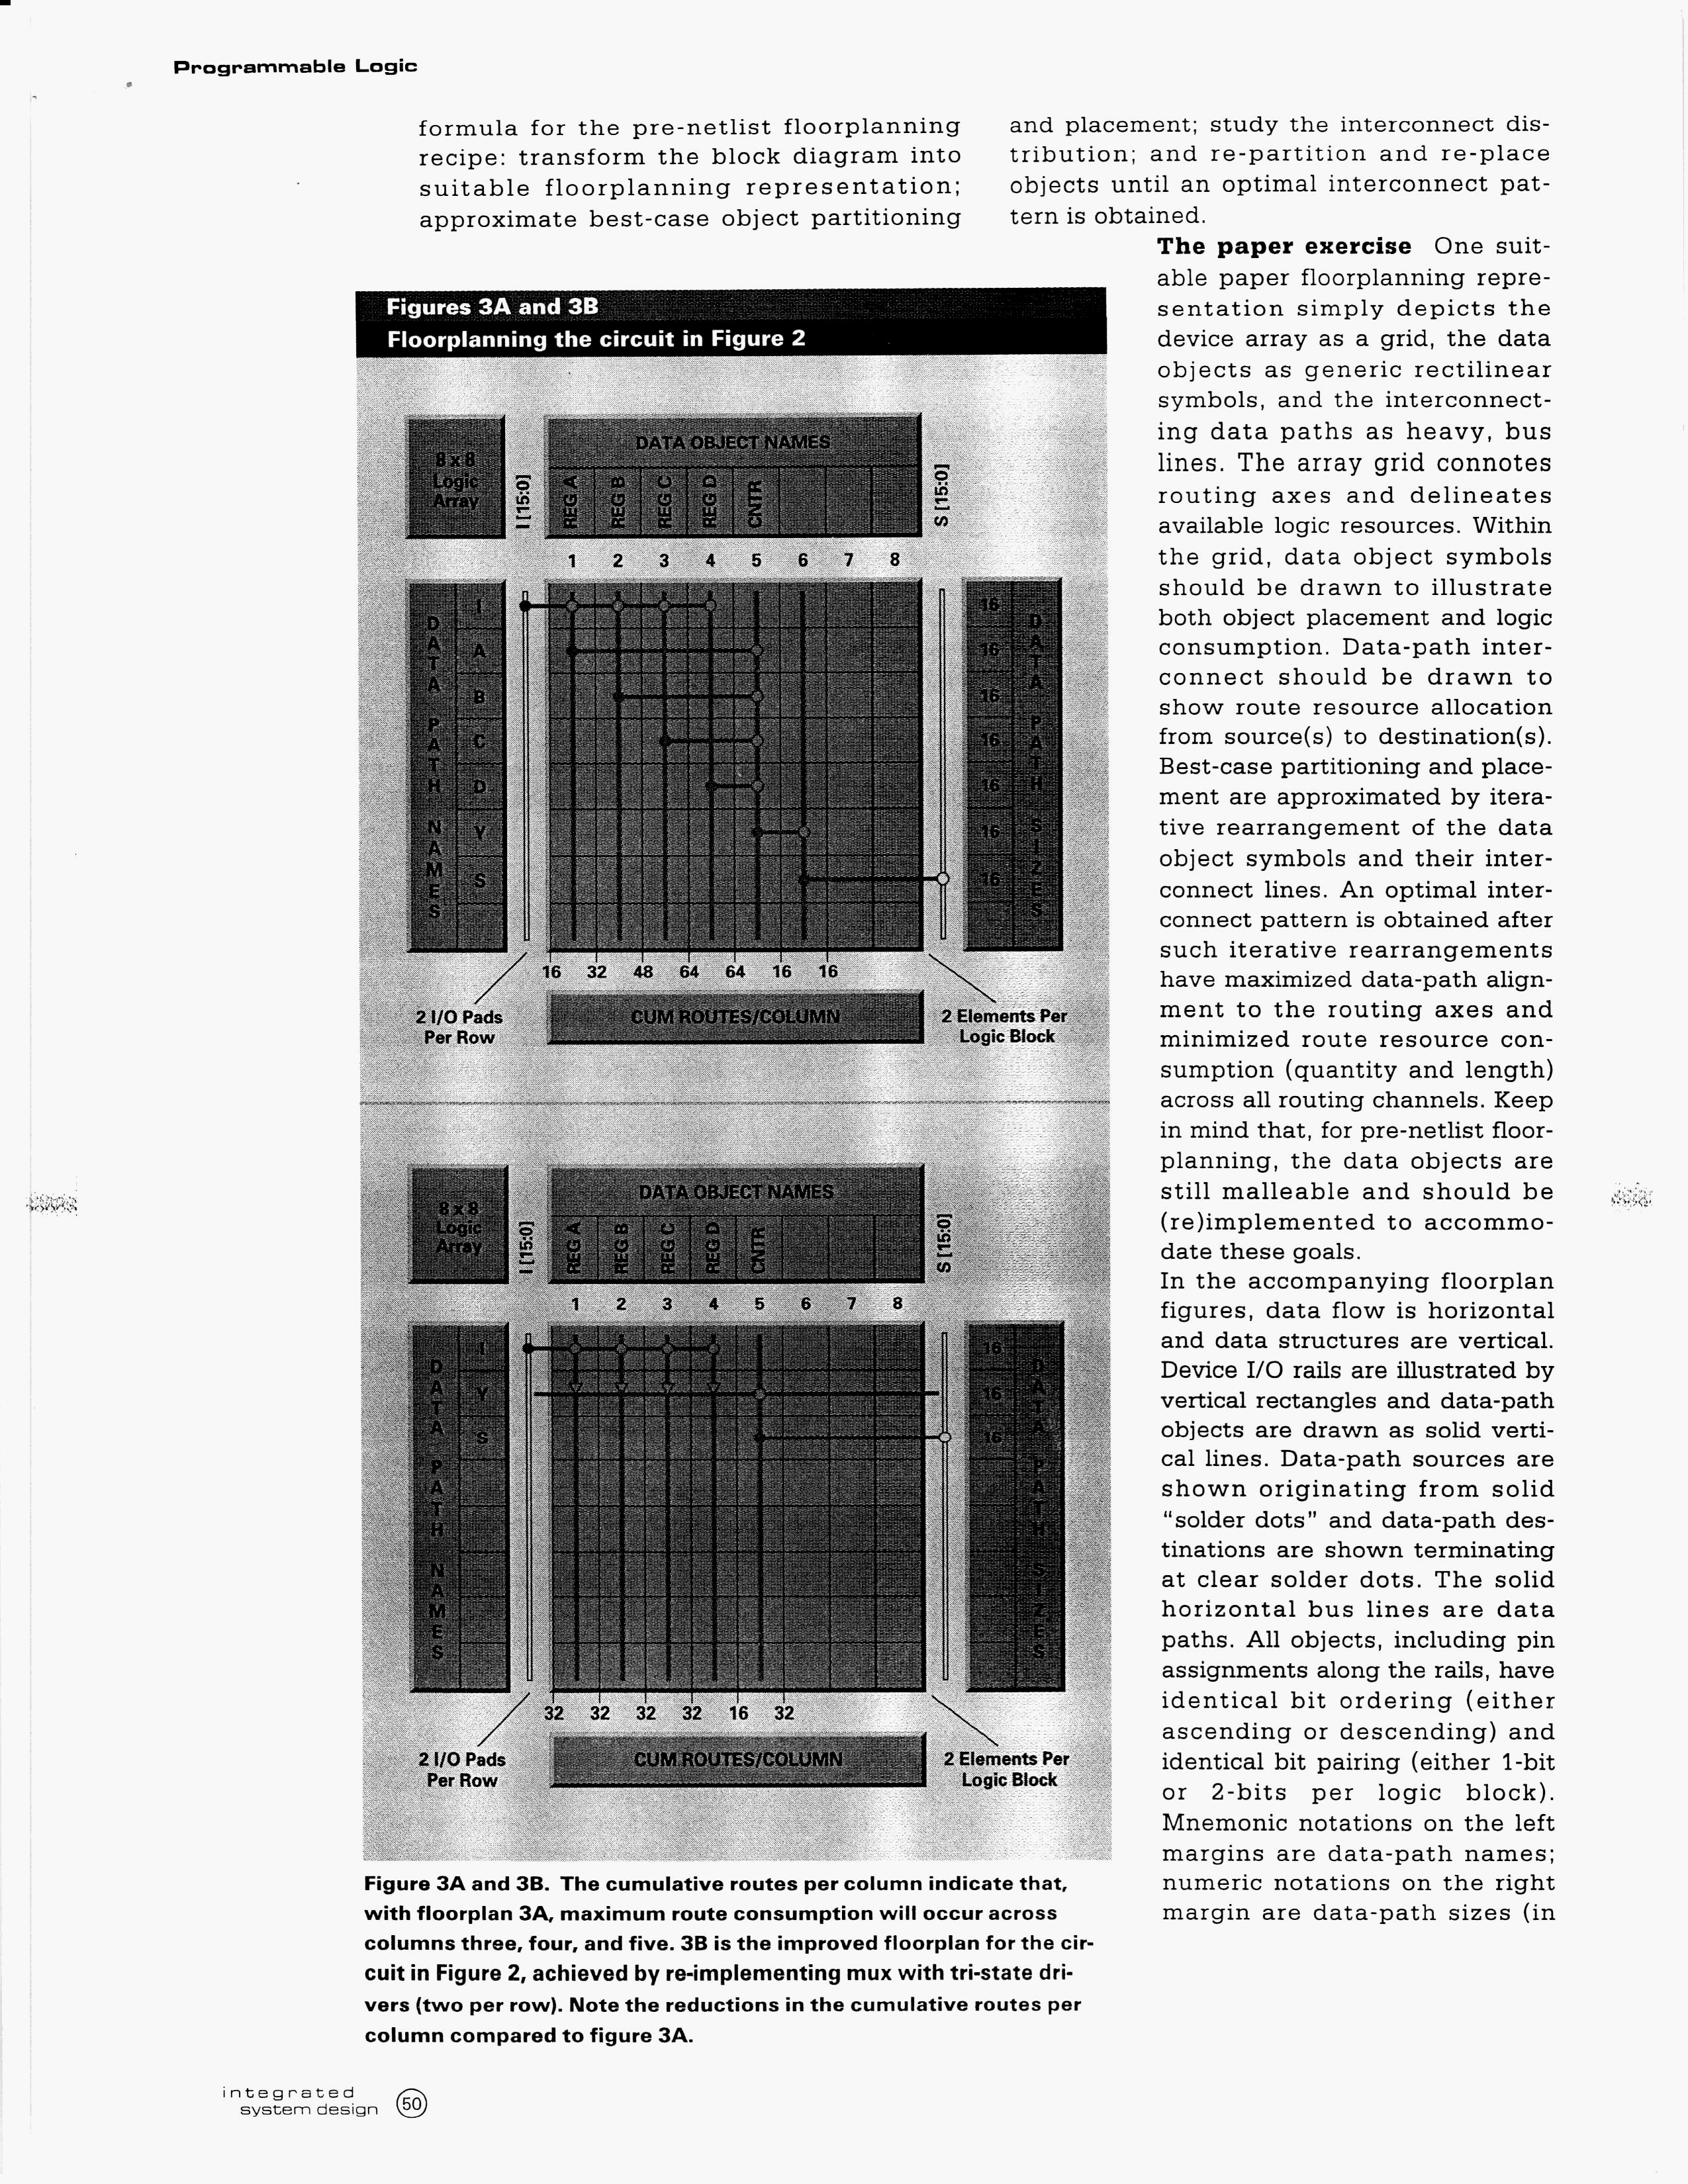 * Floorplanning for High-Performance FPGA Designs, Stephen Wasson, March 1995, Integrated System Design page 3 *